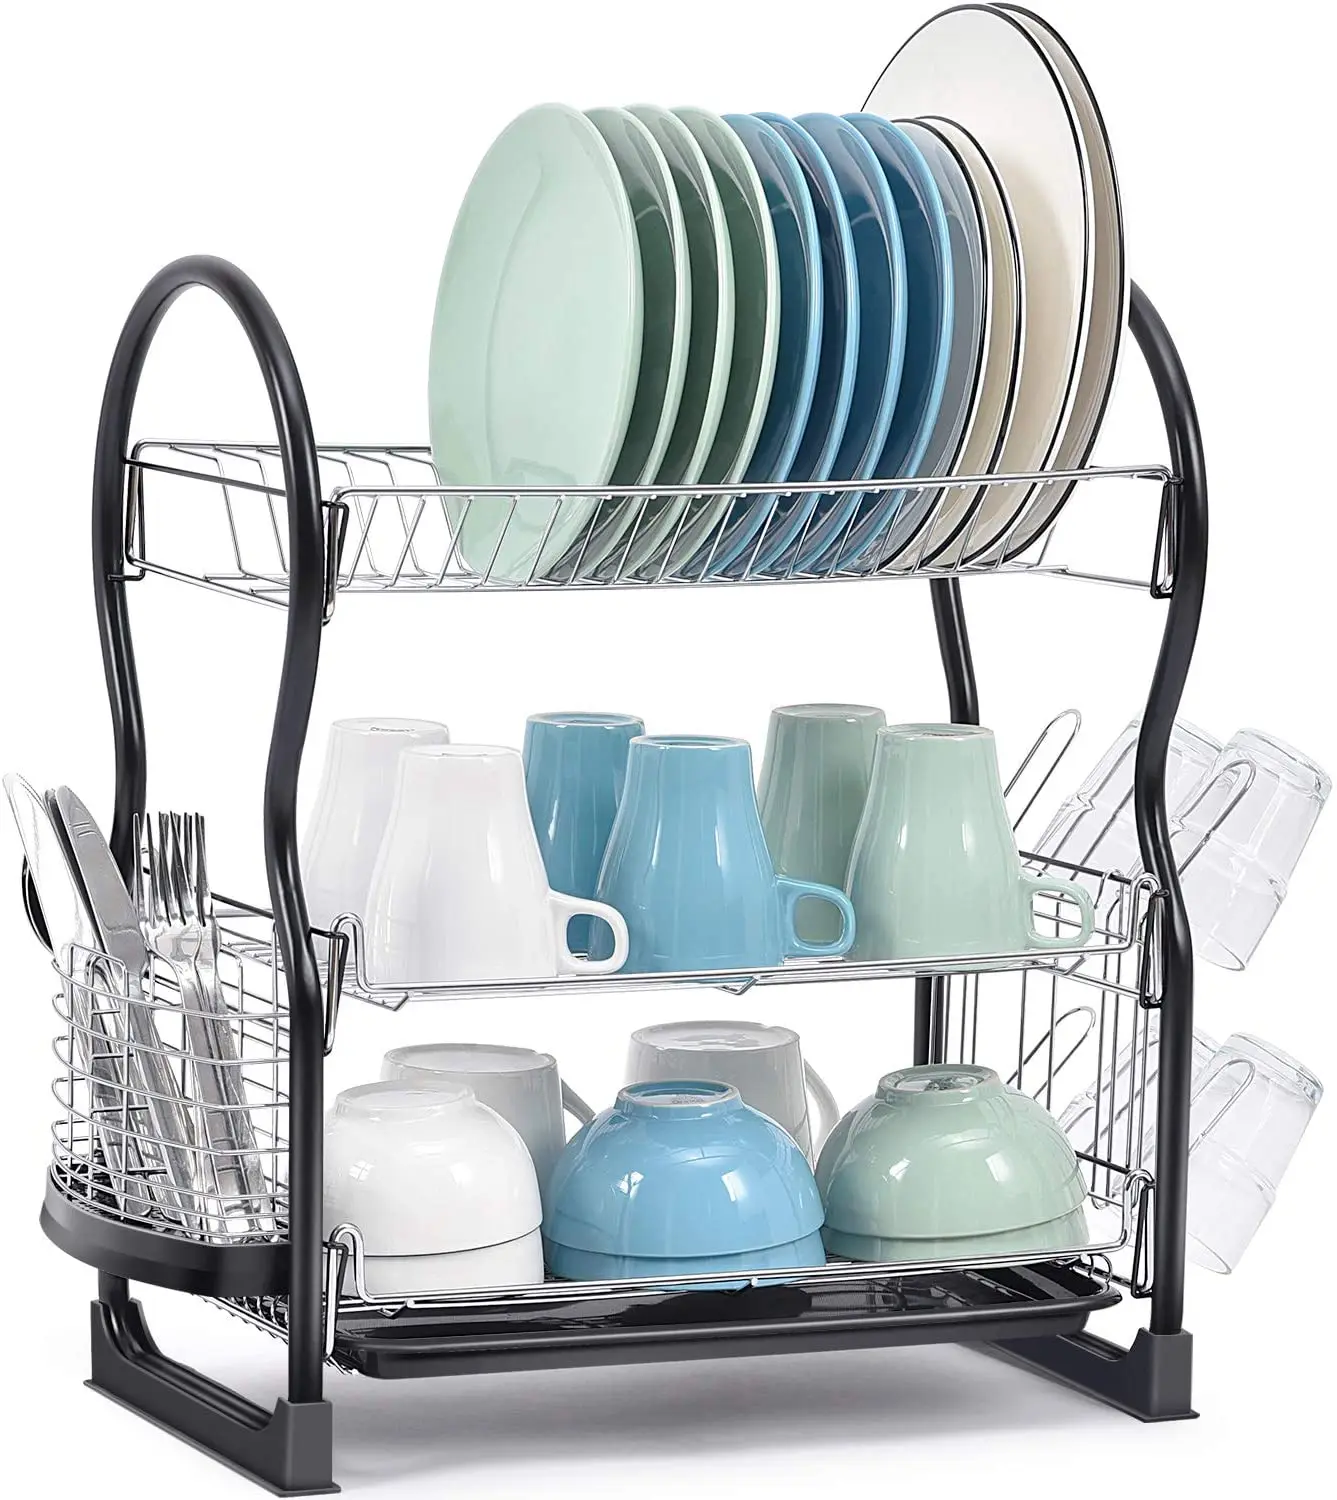 

ORZ367 Dish Drainer 3-Tier Dish Rack Large Capacity Dish Drying Rack with Drip Tray Utensil Cup Holder, Silver+ black